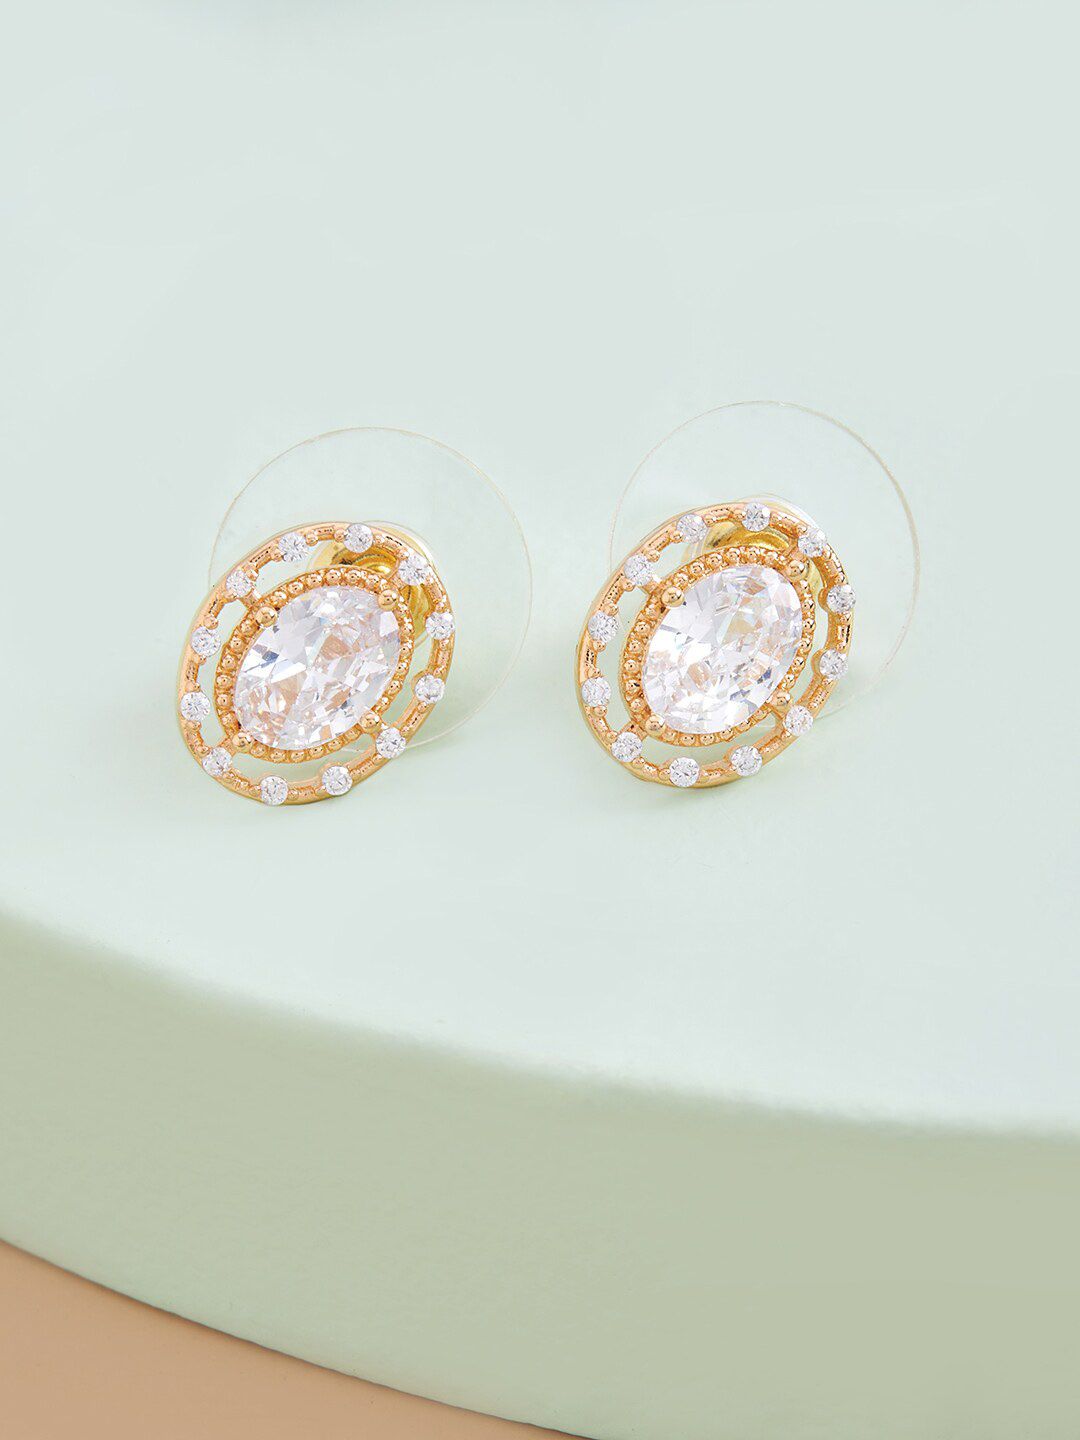 Kushal's Fashion Jewellery White Oval Studs Earrings Price in India